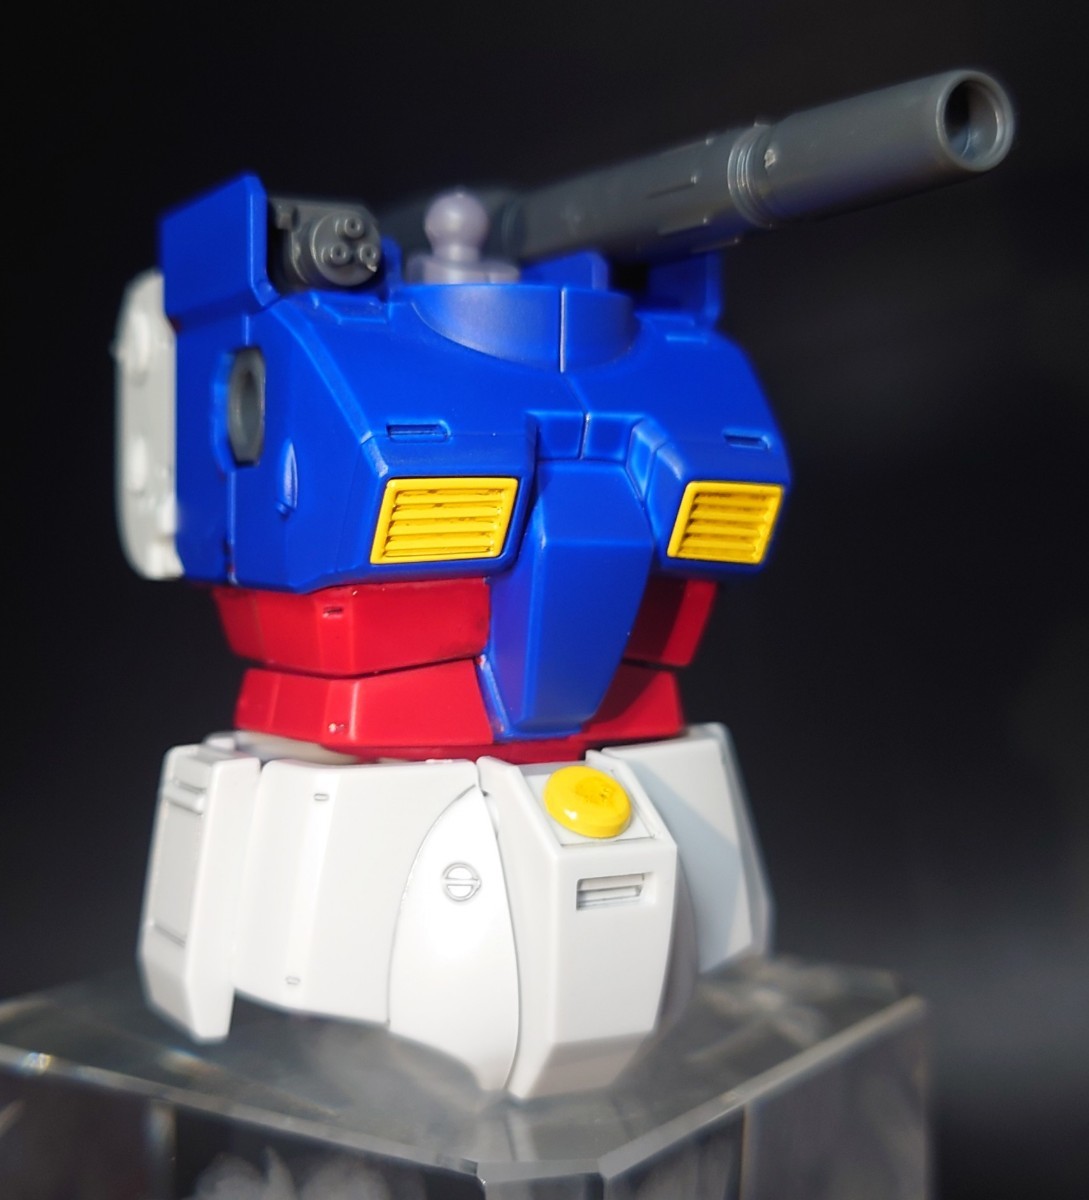 HG 1/144 gun Canon most initial model roll out 1 serial number trunk body small of the back part backpack parts mixing has painted final product gun pra regular goods including in a package welcome 